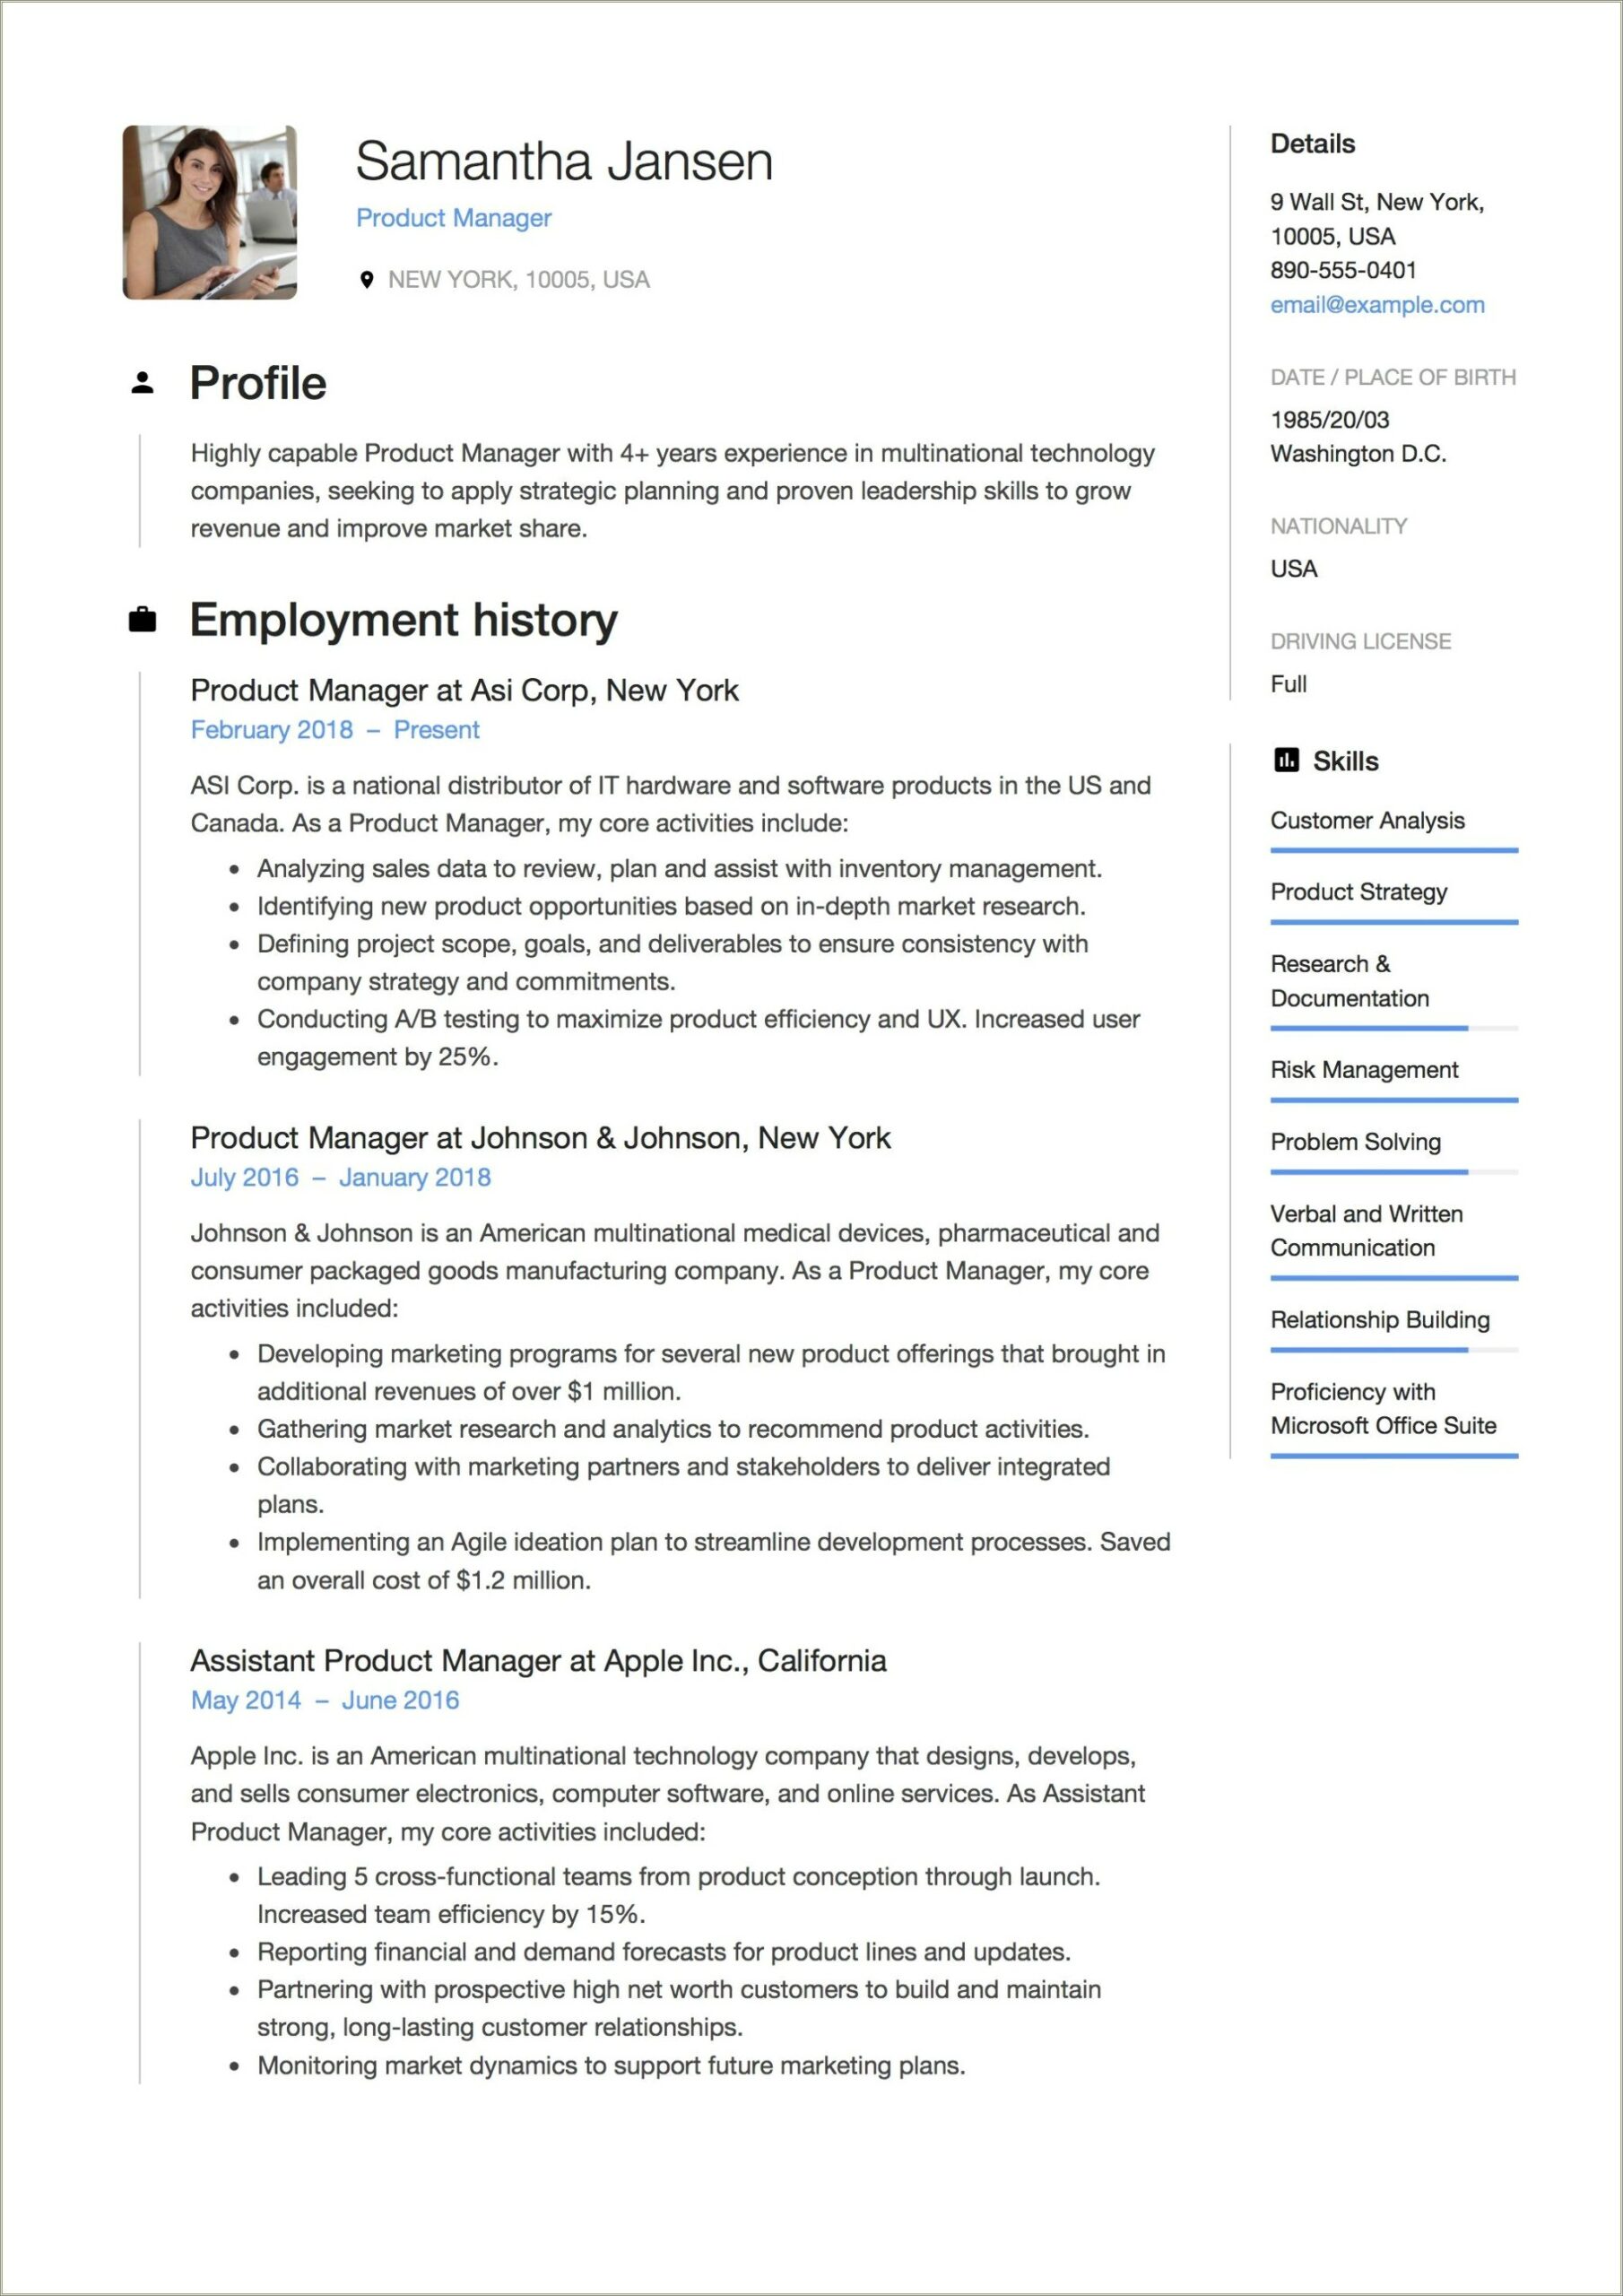 Product Manager Description For A Resume